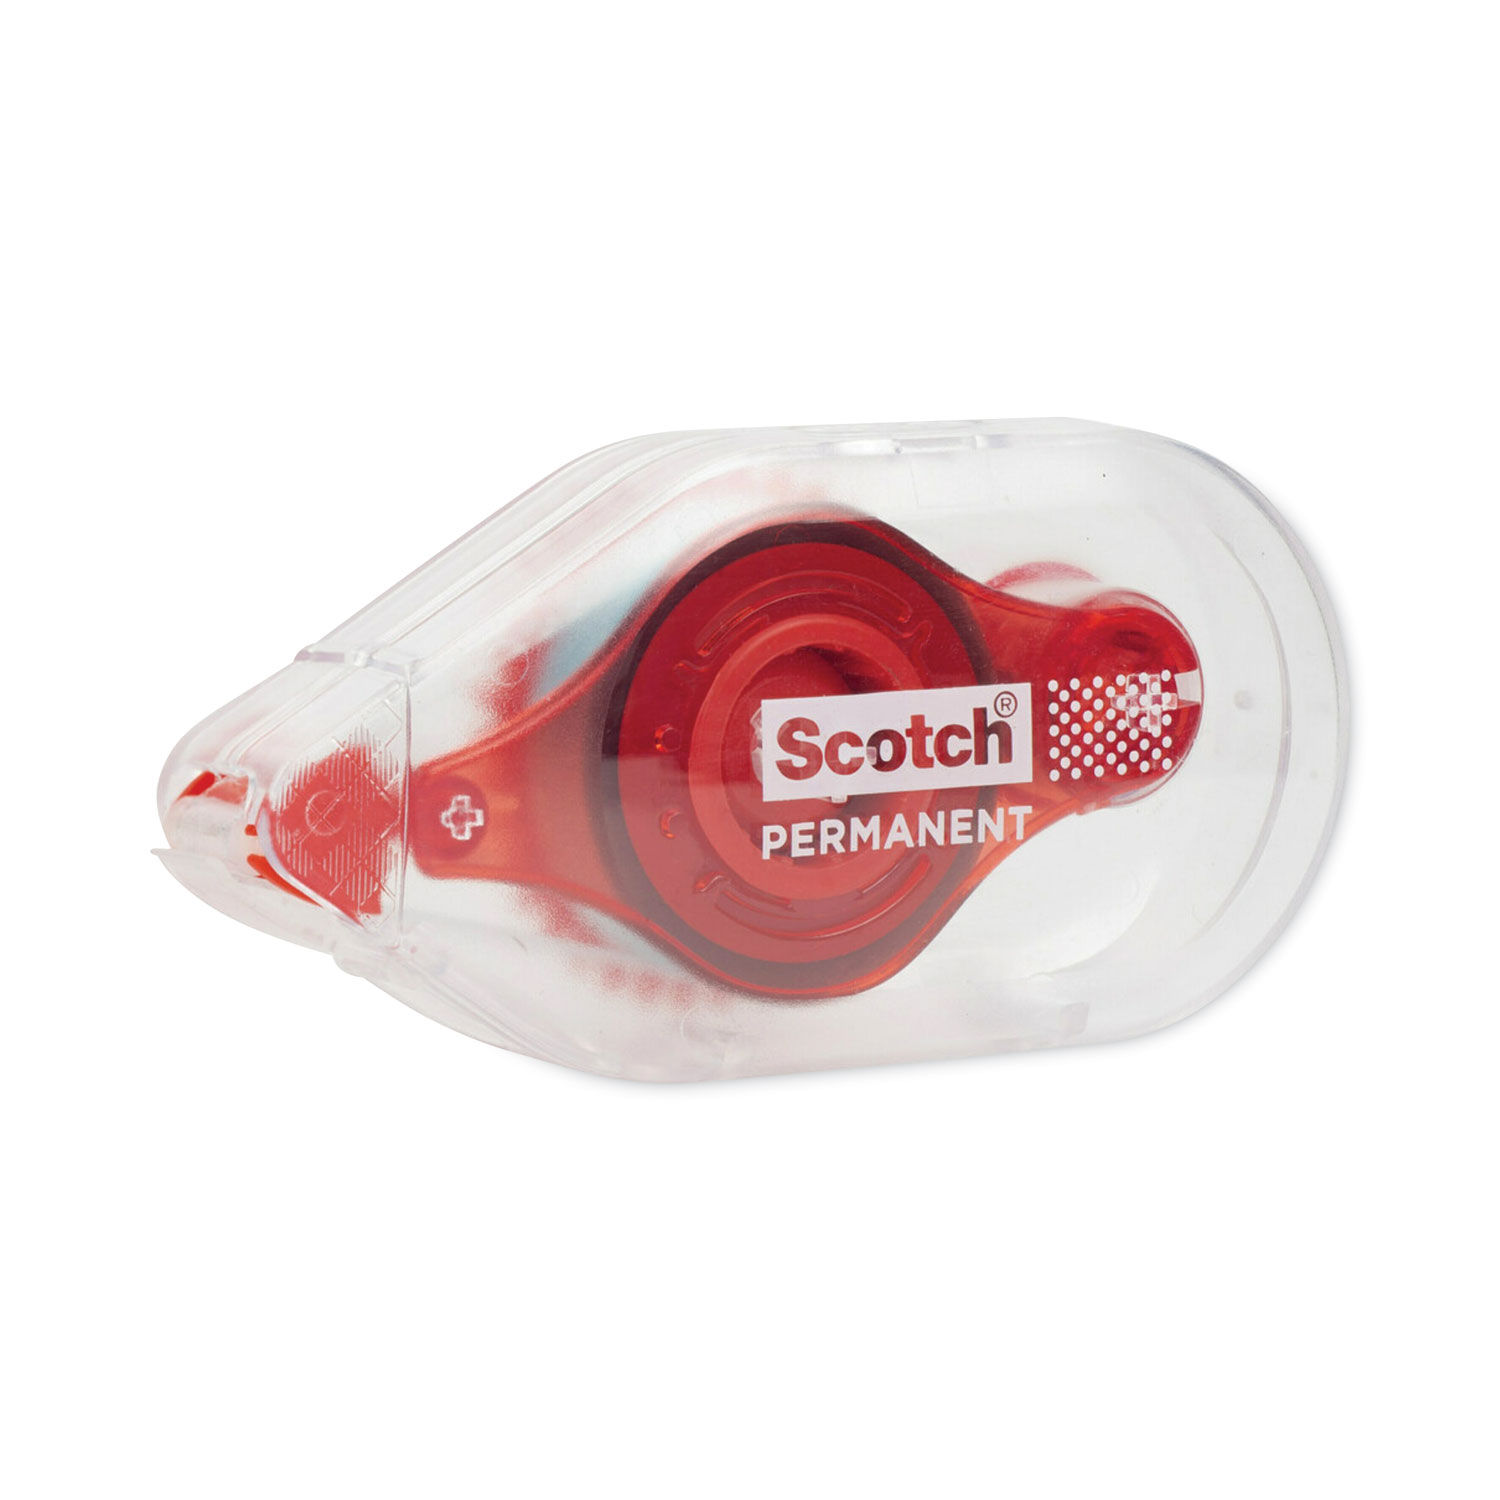 Scotch Adhesive Dot Roller, Permanent